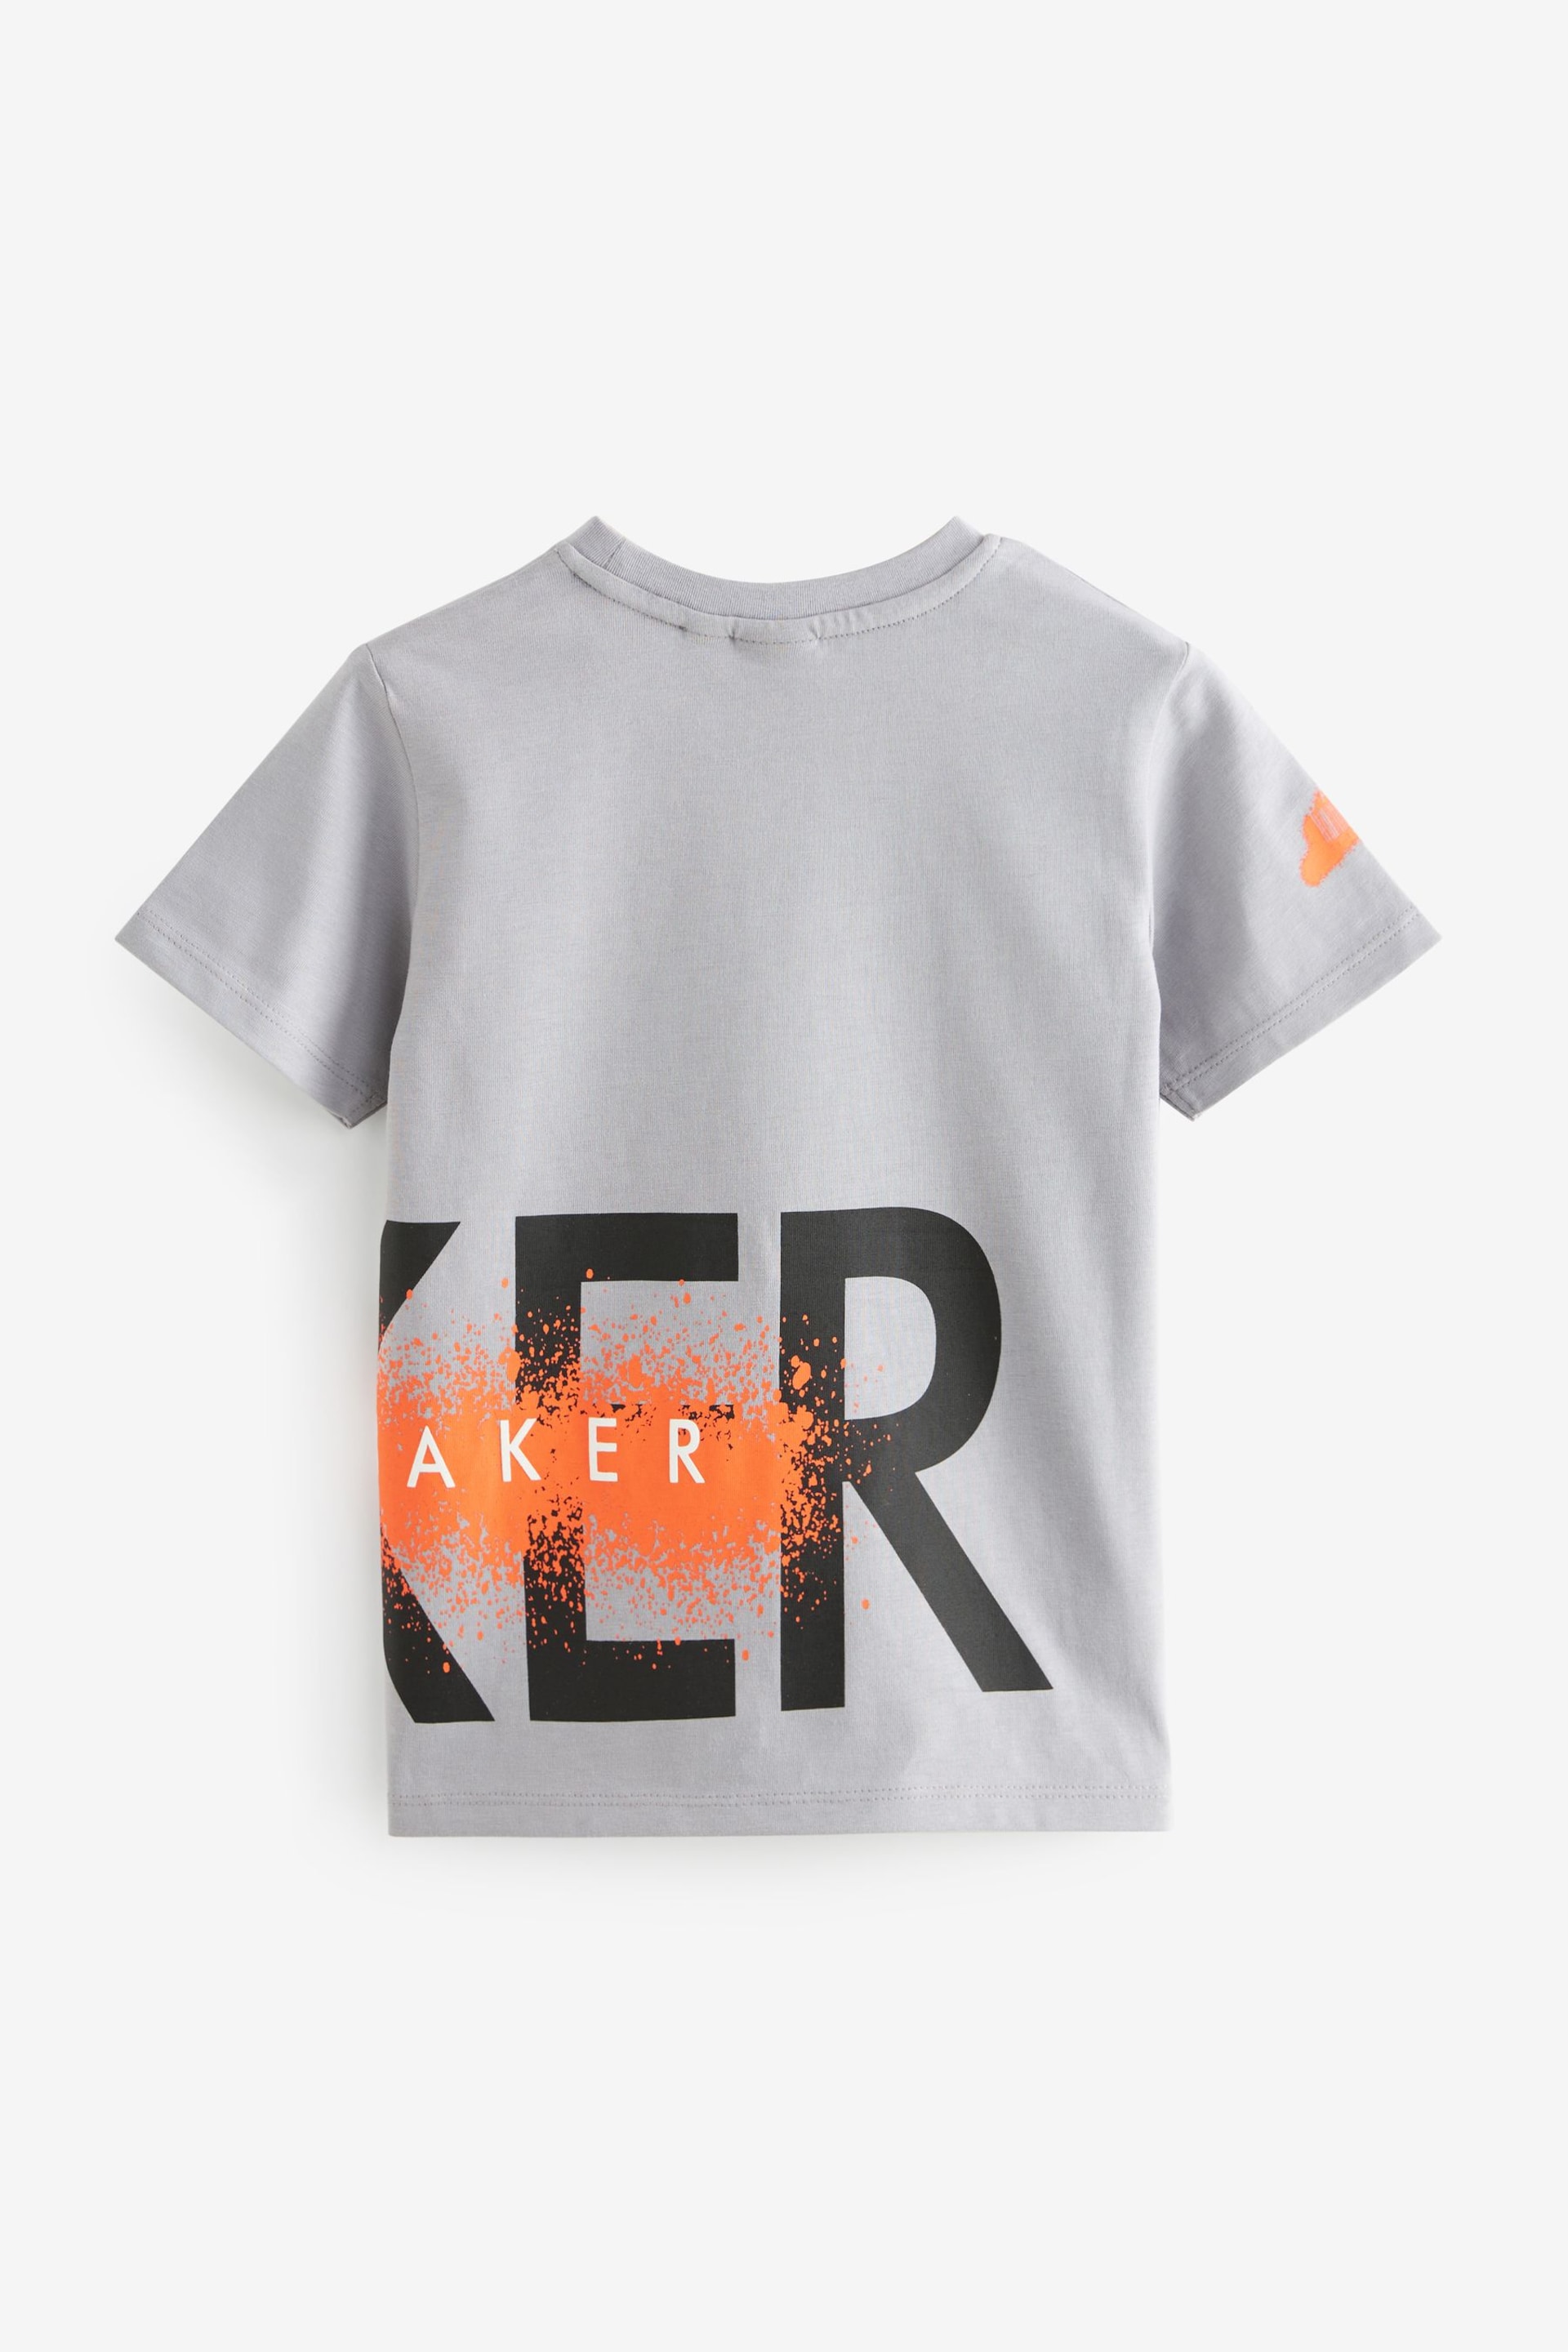 Baker by Ted Baker Graphic T-Shirt - Image 2 of 4